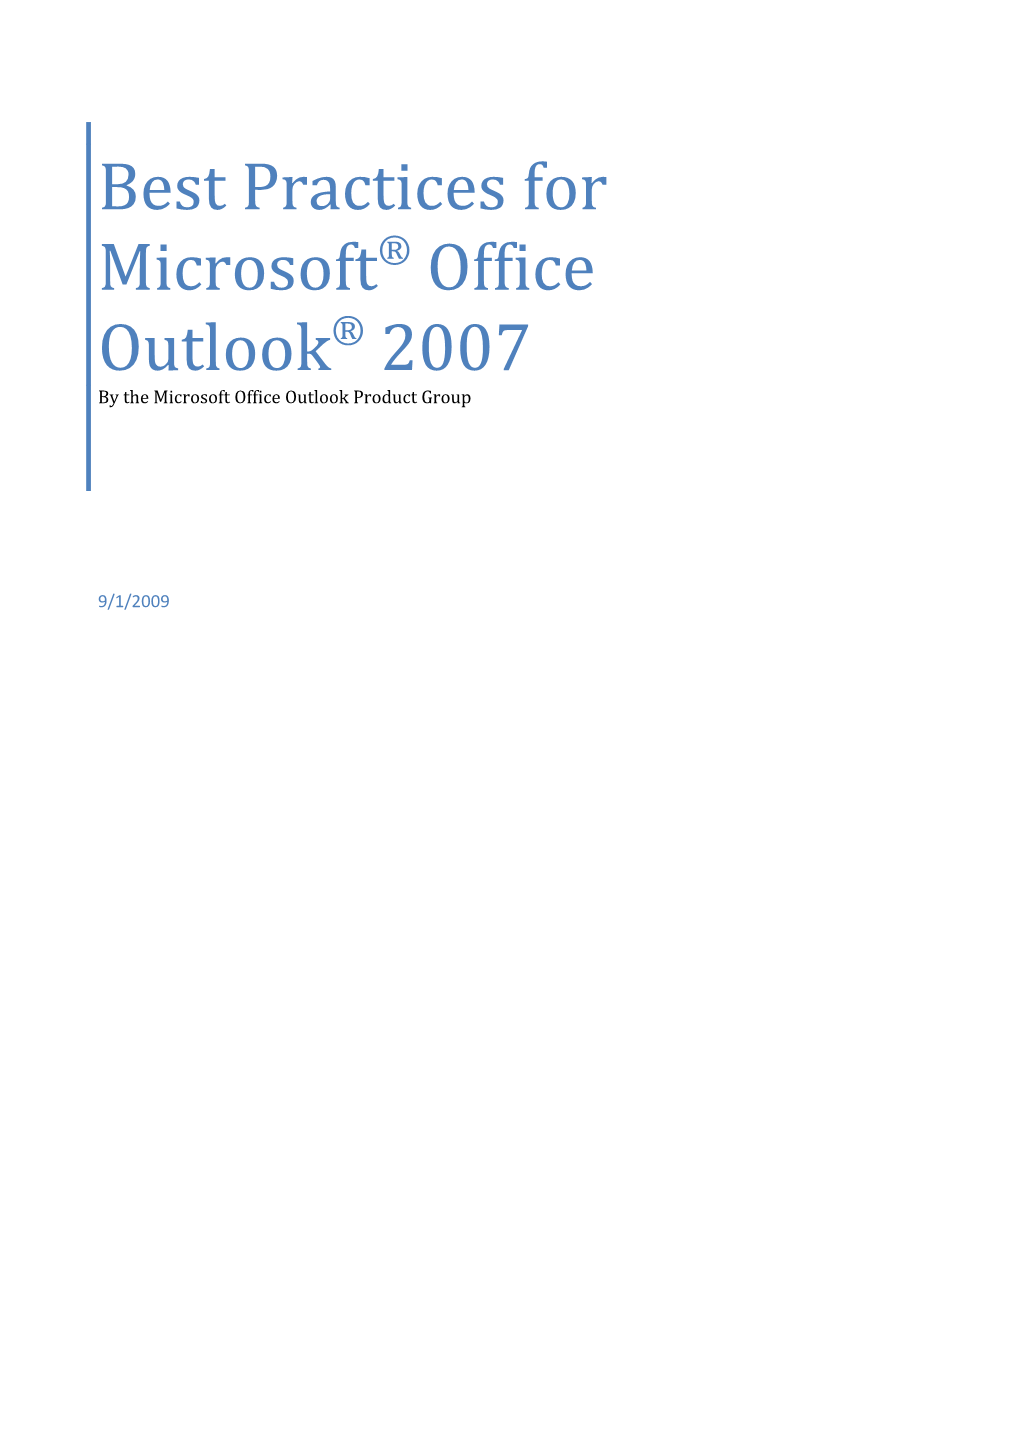 Best Practices for Microsoft Office Outlook 2007